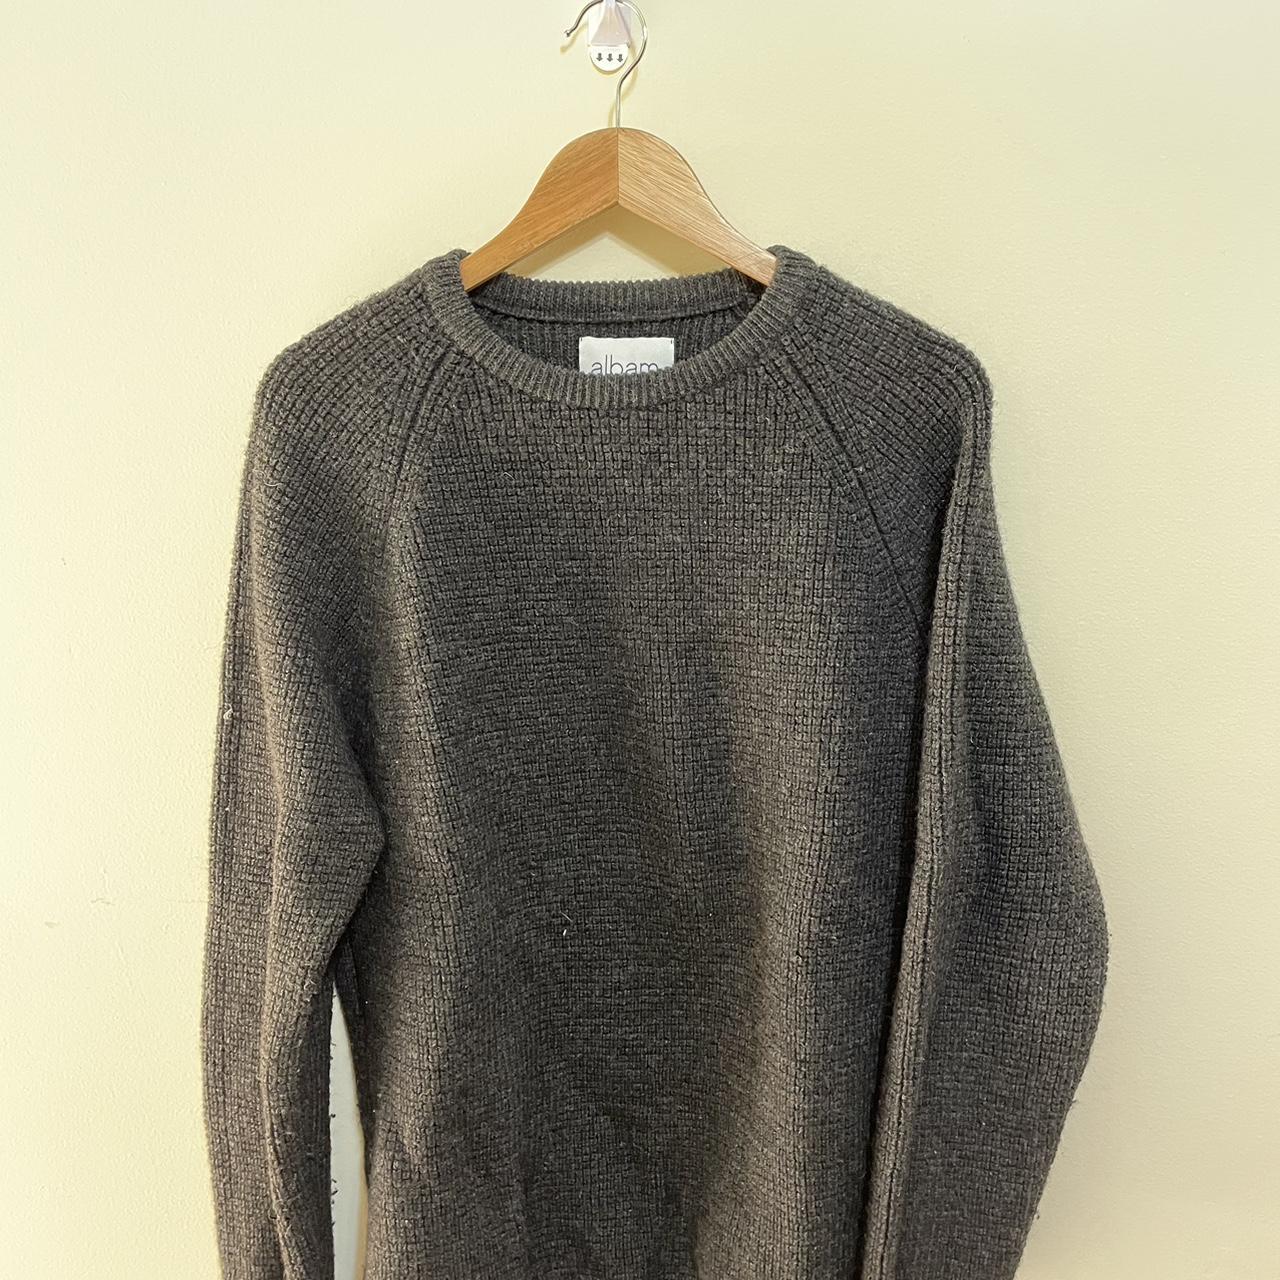 Albam woollen sweater. Very thick wool and extremely... - Depop